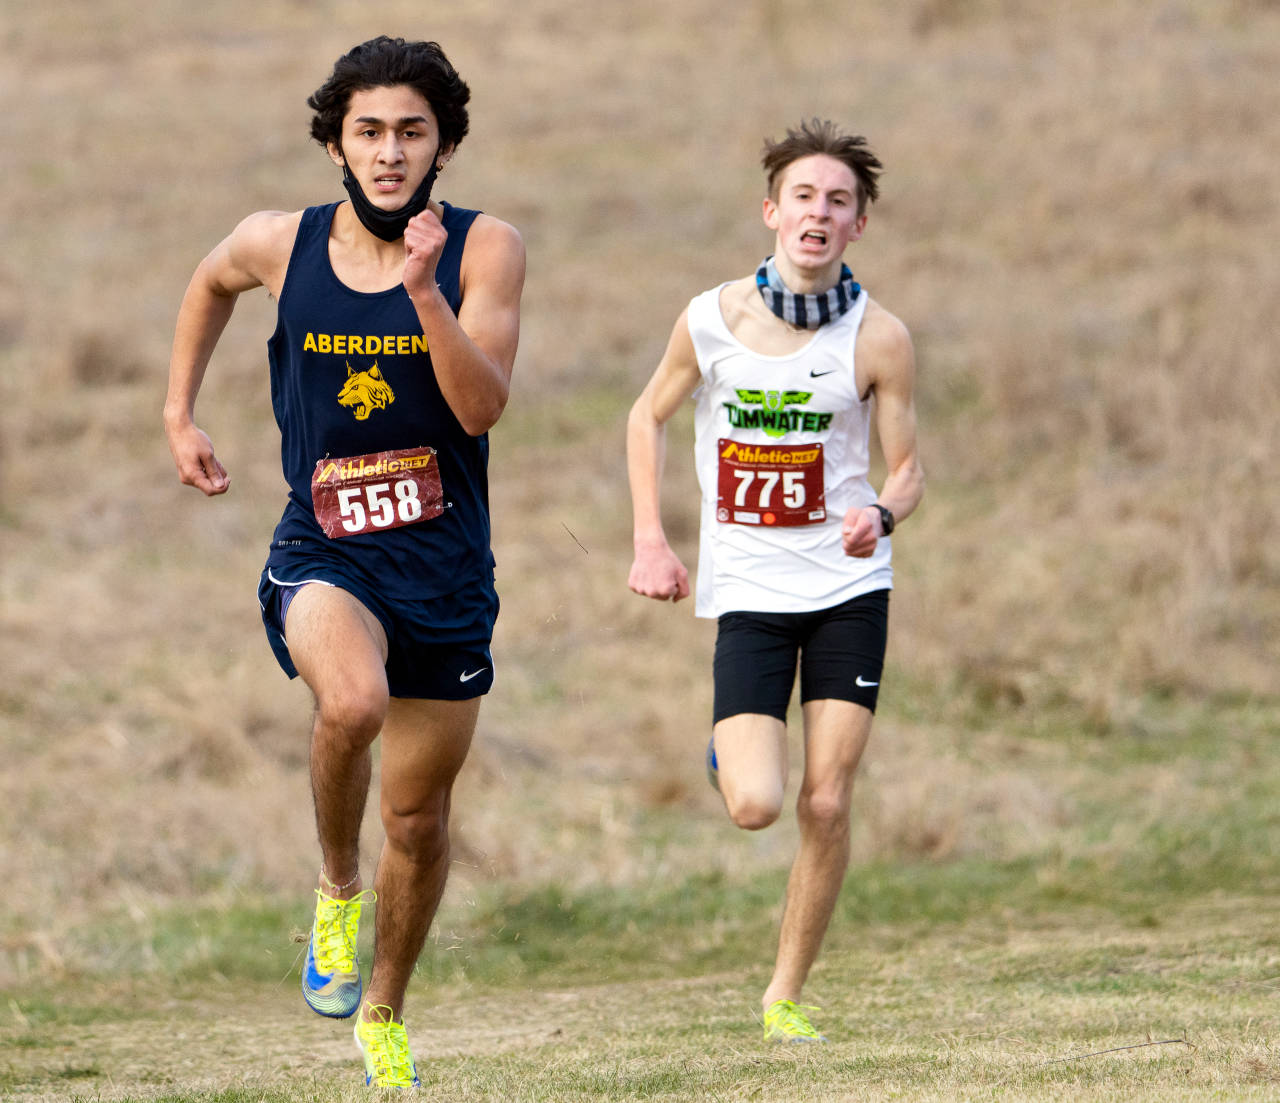 Aberdeen’s Julian Campos, left, heads to the finish line ahead of Tumwater’s John Hoffer to win the 2A Evergreen Conference Championship on Saturday in Shelton. (Justin Johnson | Mason County Journal)